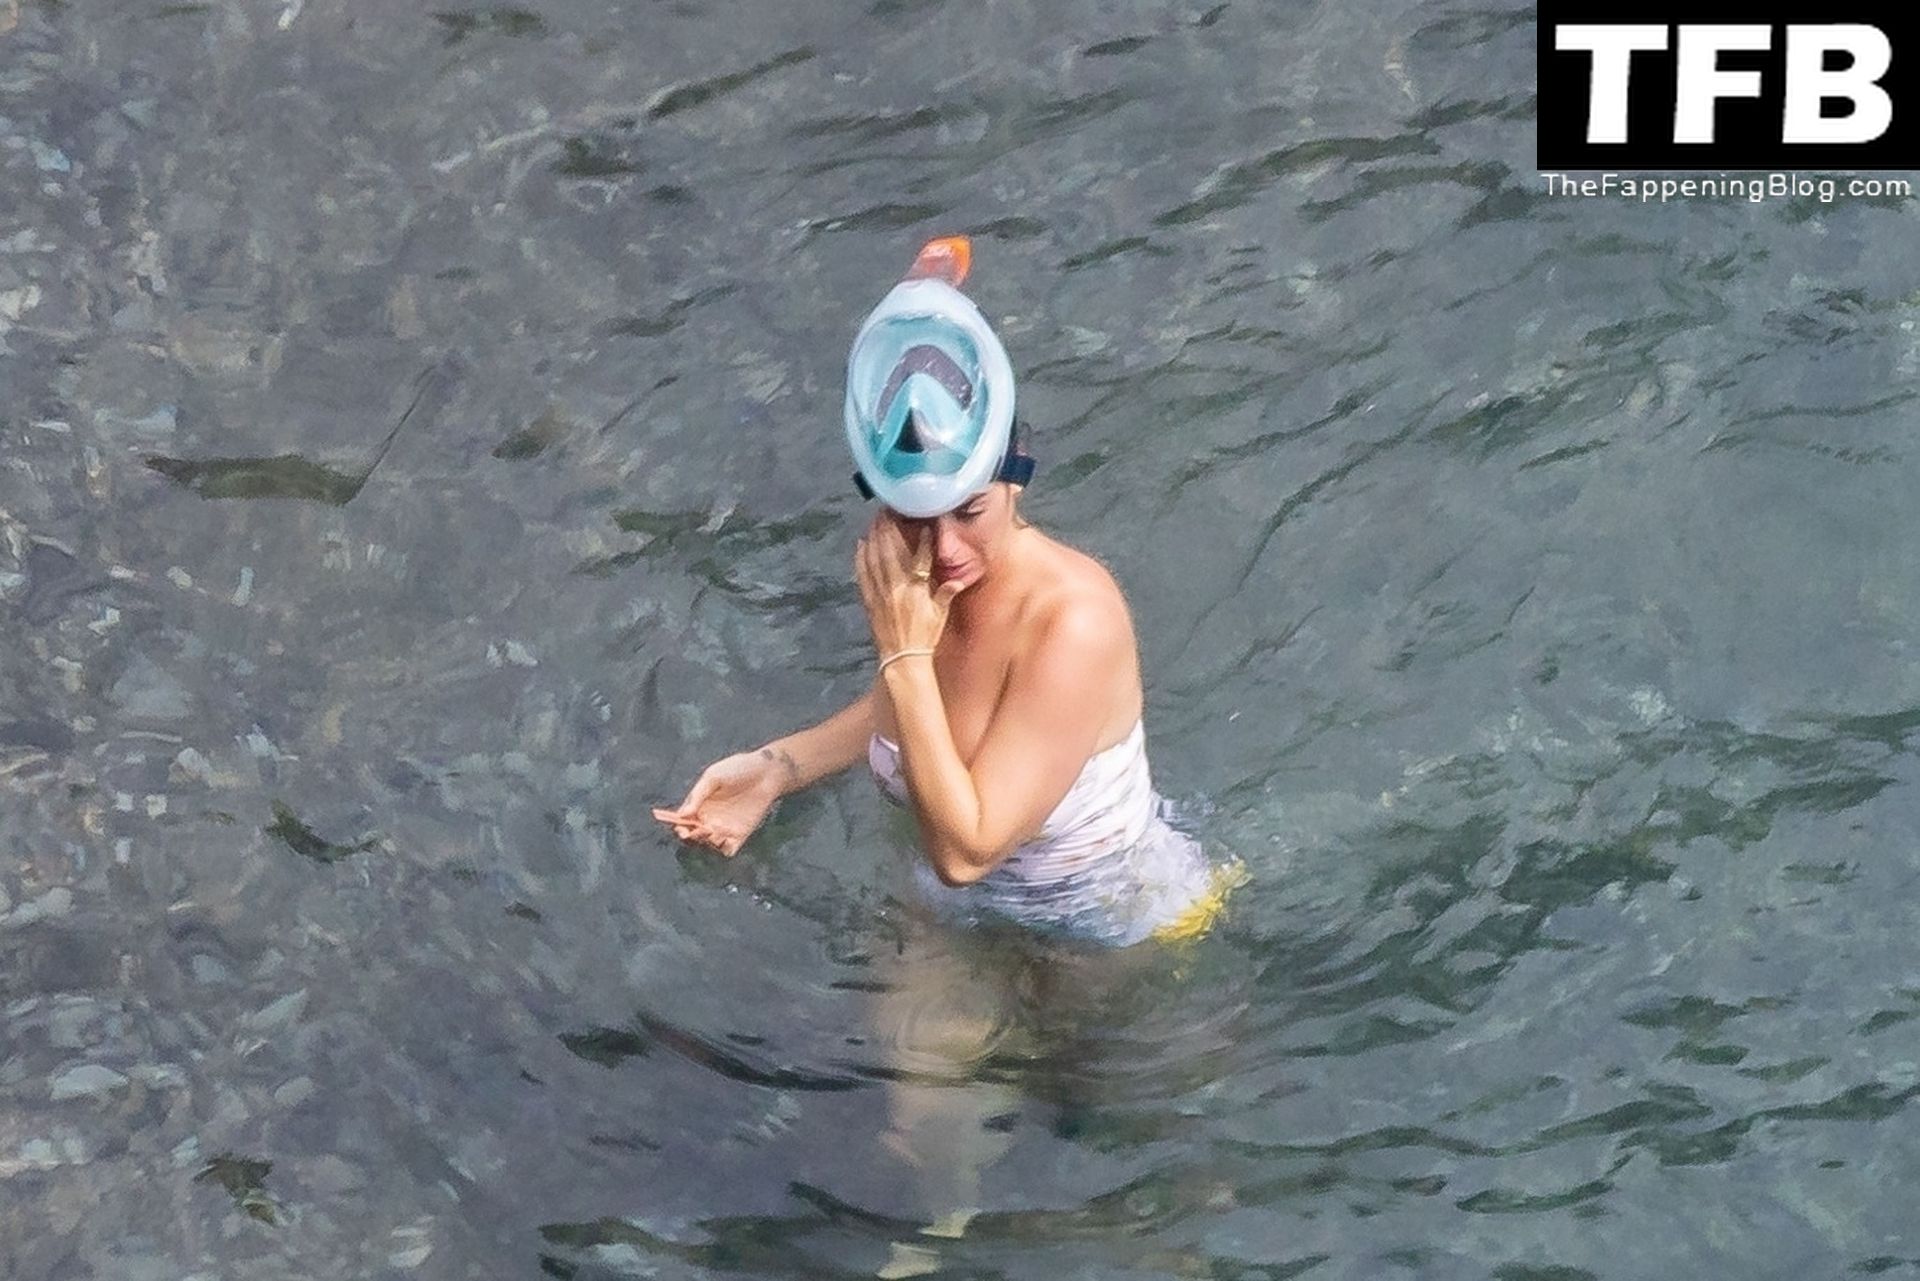 Katy Perry Sexy The Fappening Blog 57 - Katy Perry Rocks a Strapless Swimsuit While Enjoying a Beach Day with Orlando Bloom in Positano (105 Photos)